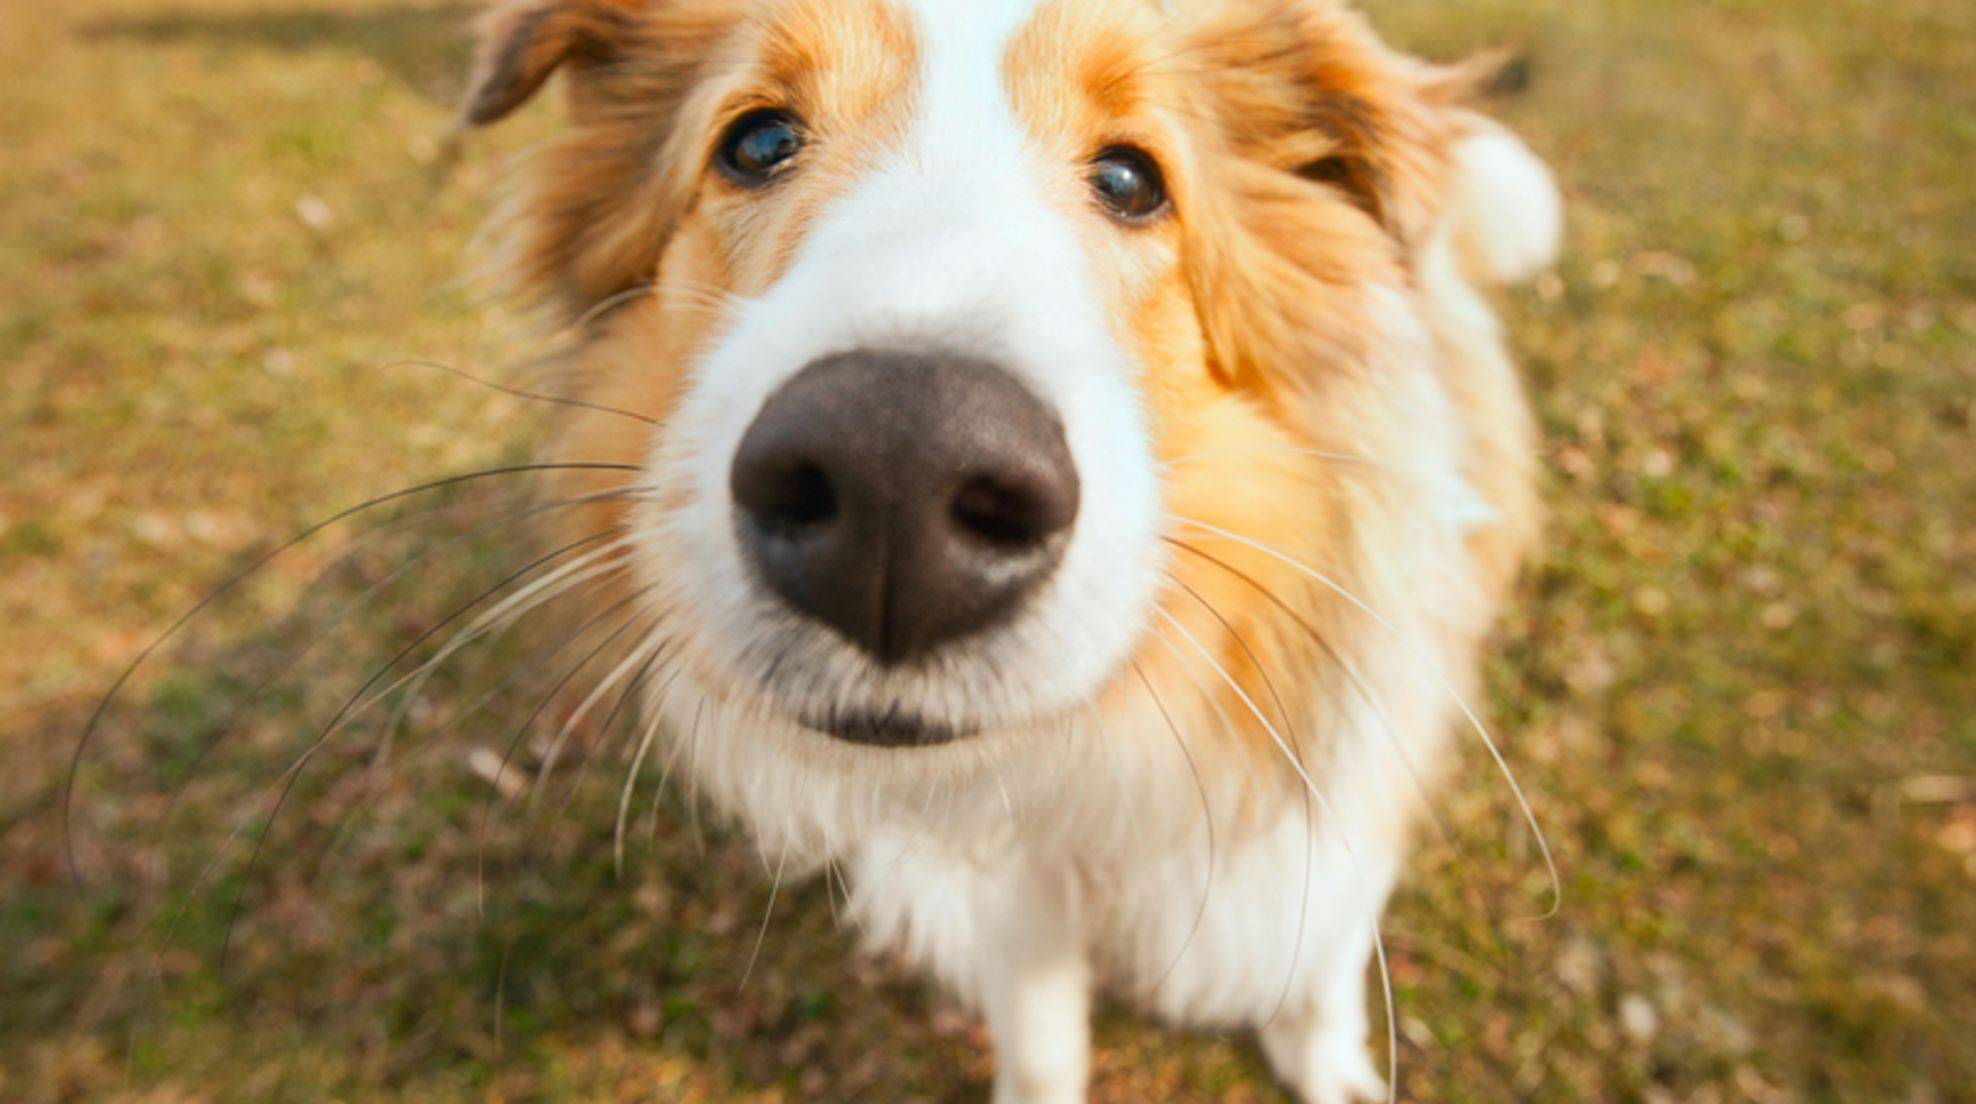 The right nose: a sense of smell in dogs